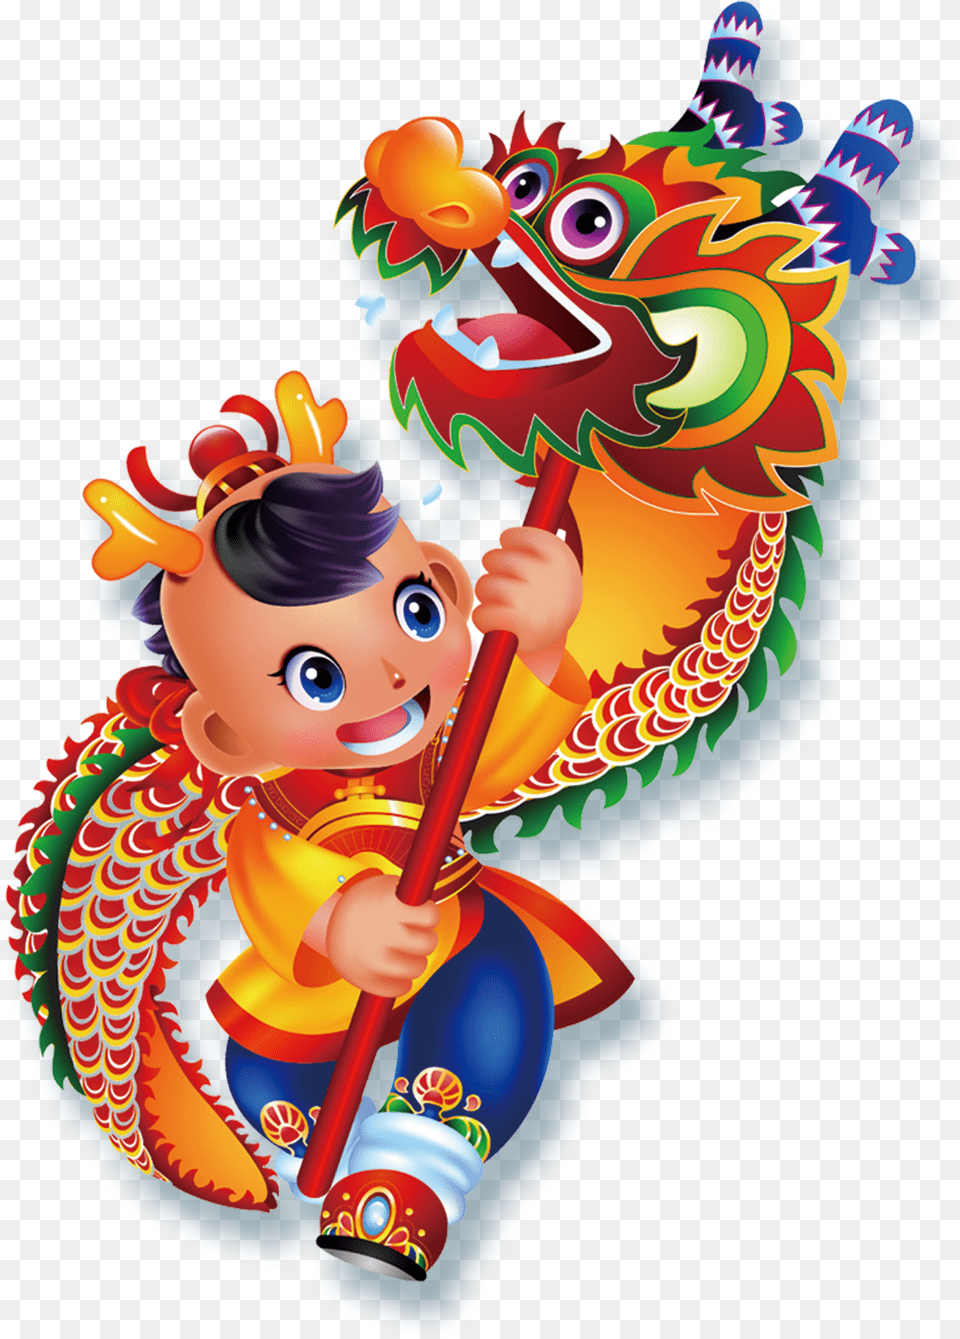 Dragon Dance Lion Dance Chinese New Year Cartoon Illustration Chinese New Year Lion Dance Cartoon Free Transparent Png